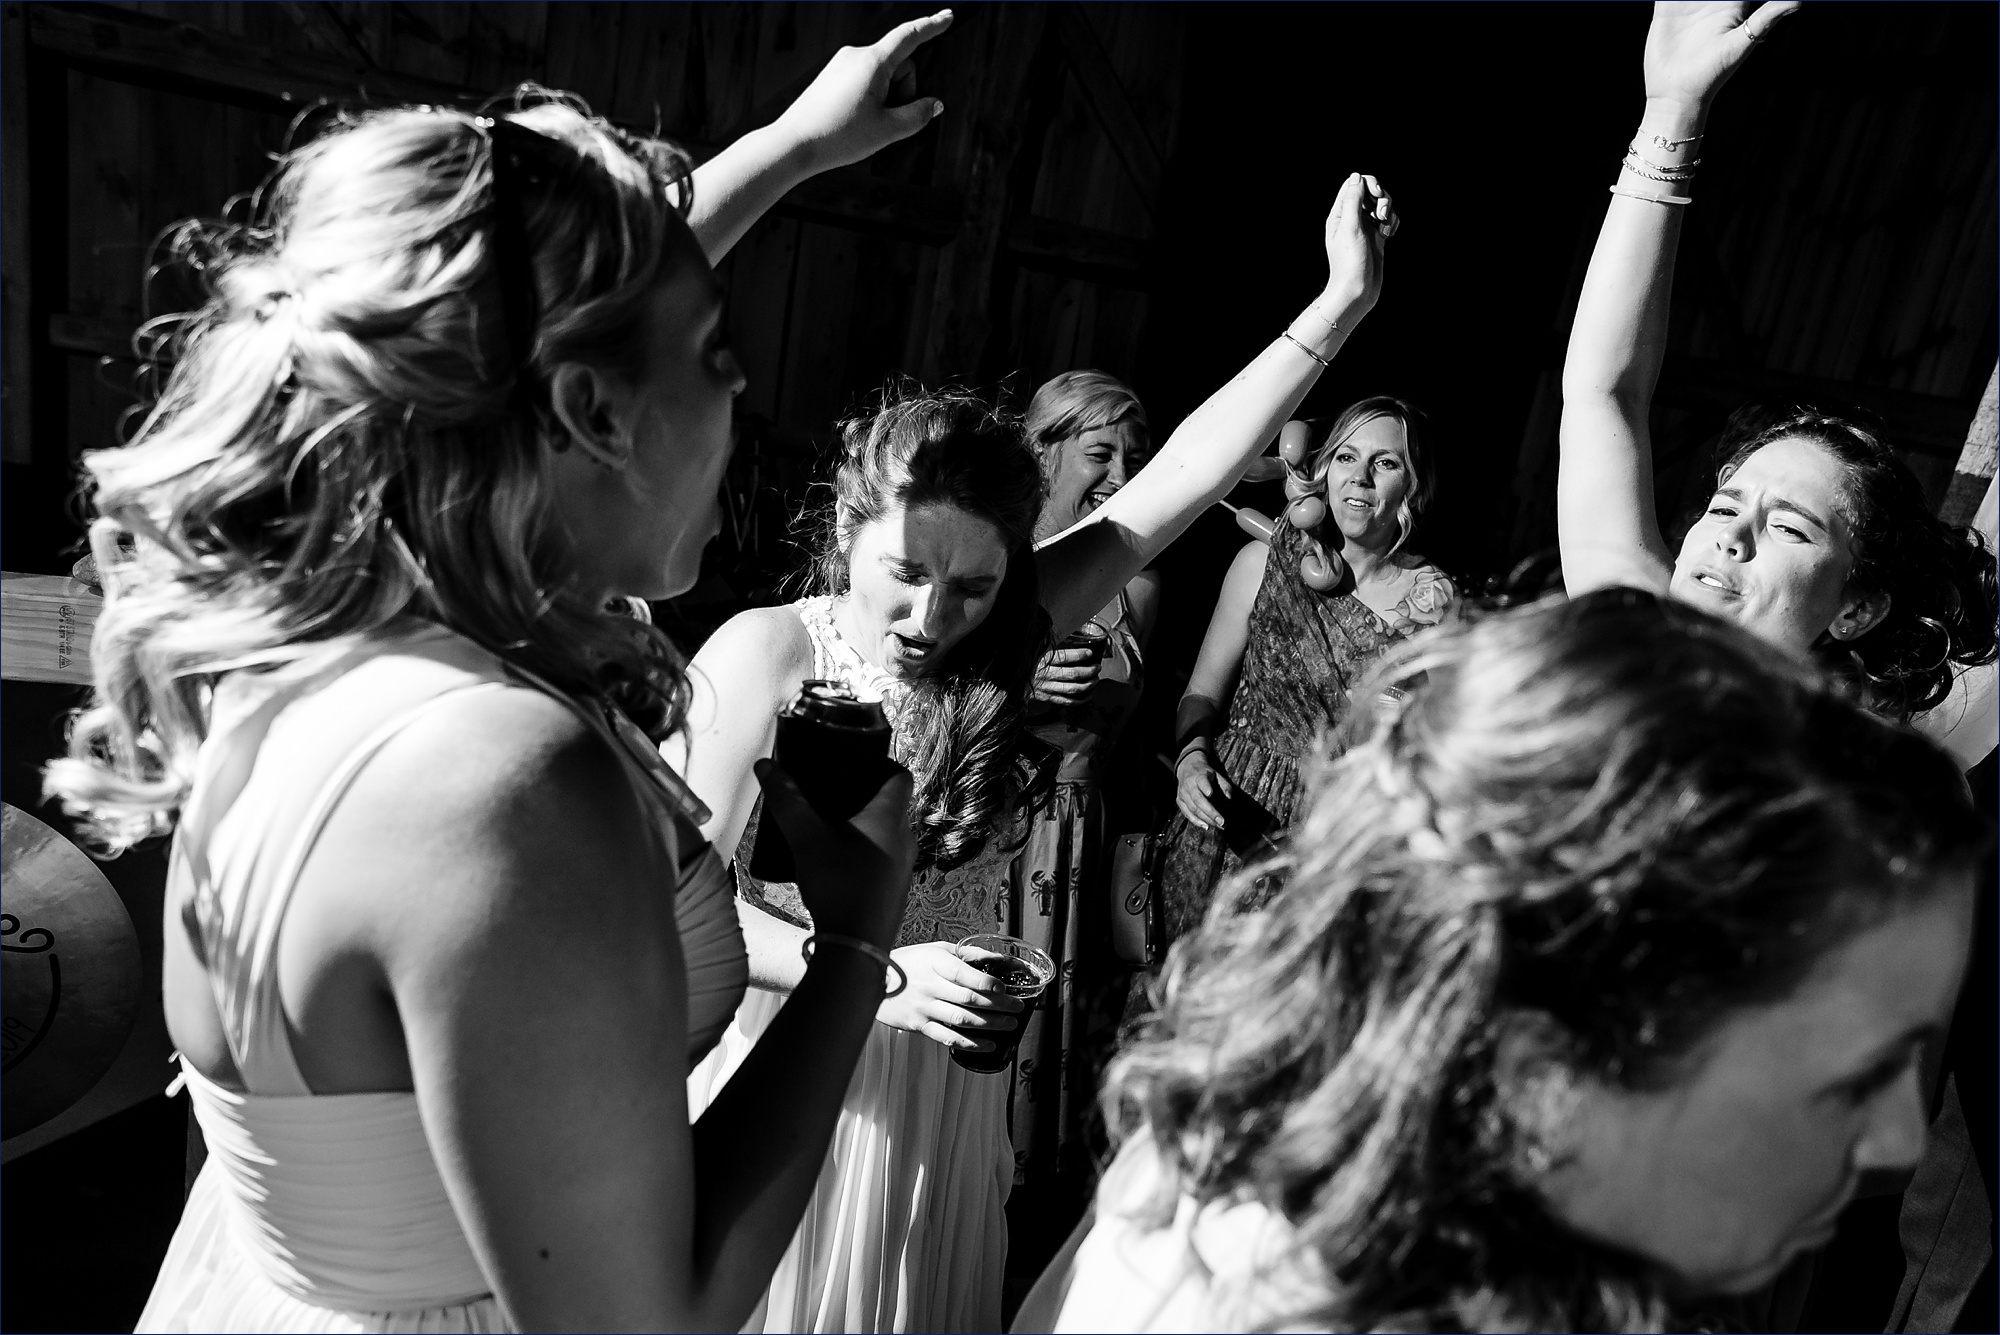 Guests sing and dance at the wedding reception in New Hampshire